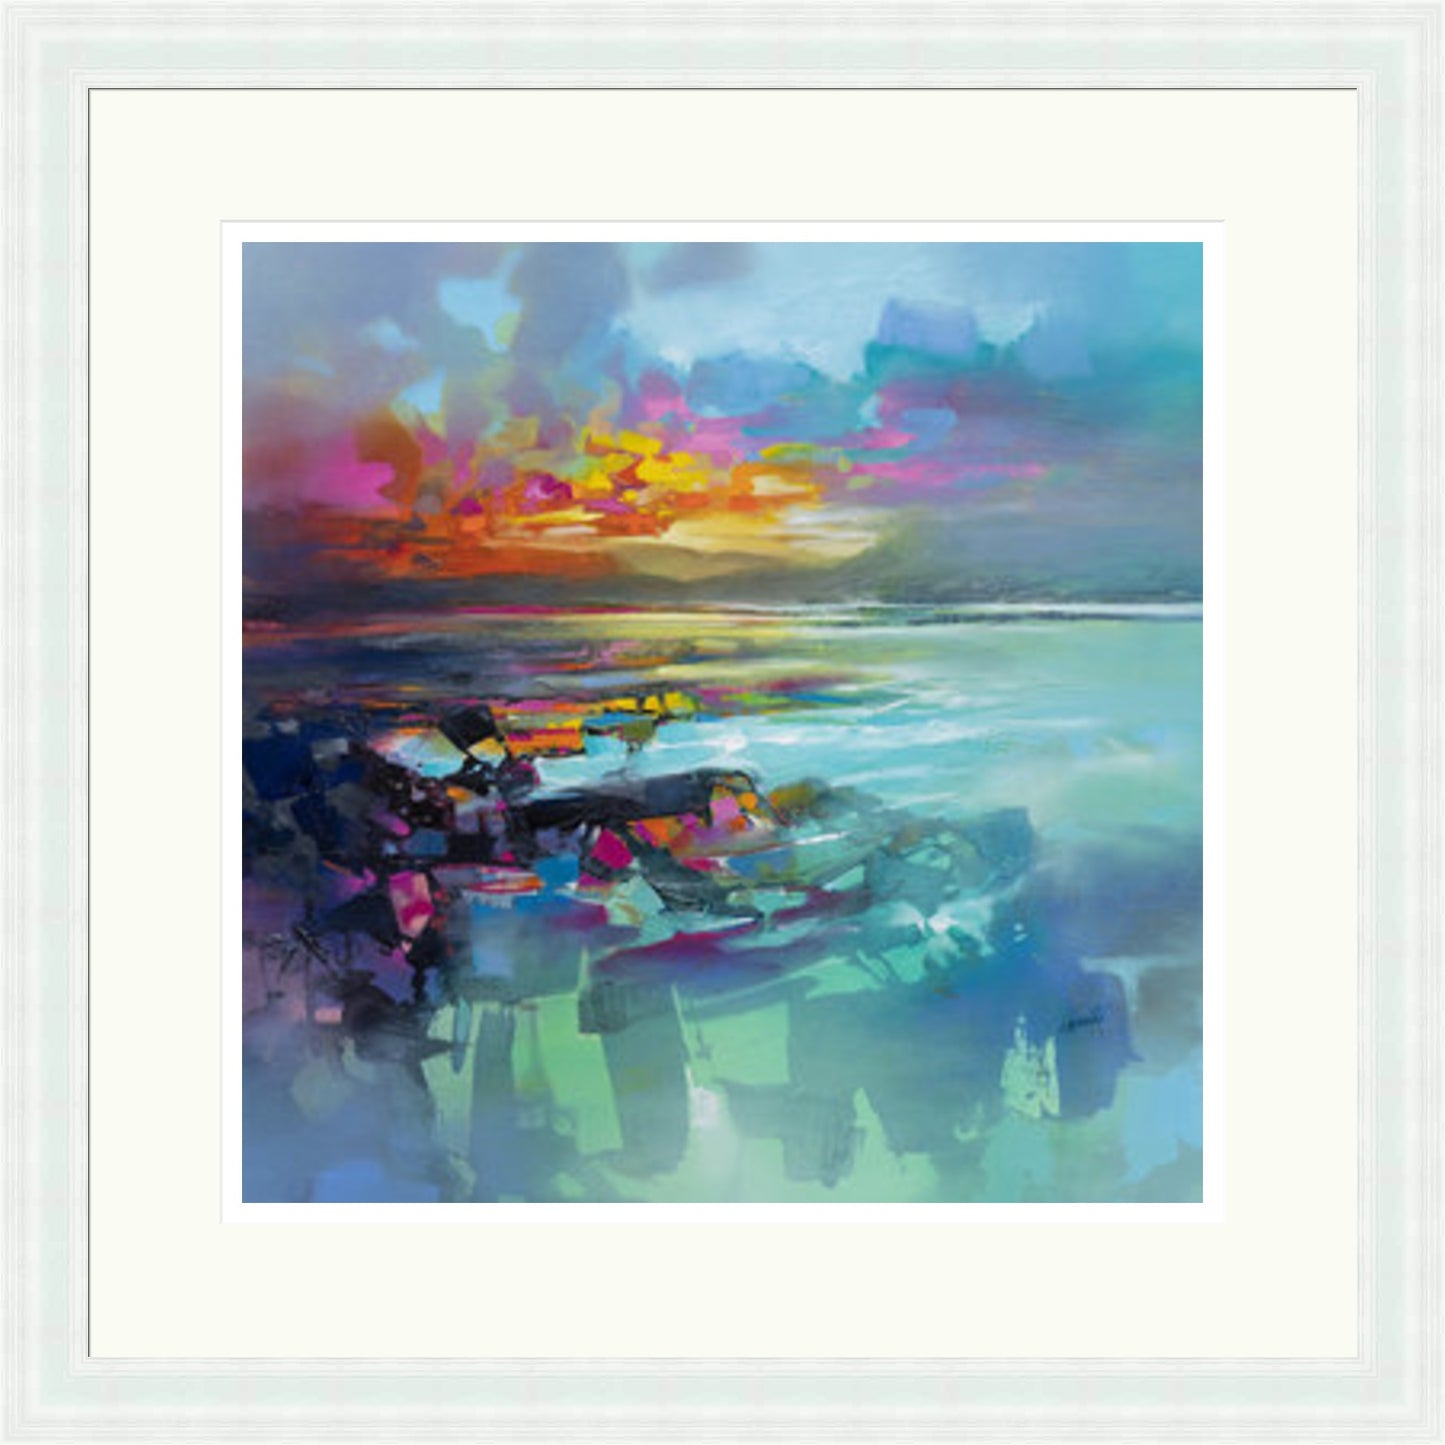 Approaching Arran (Limited Edition) by Scott Naismith